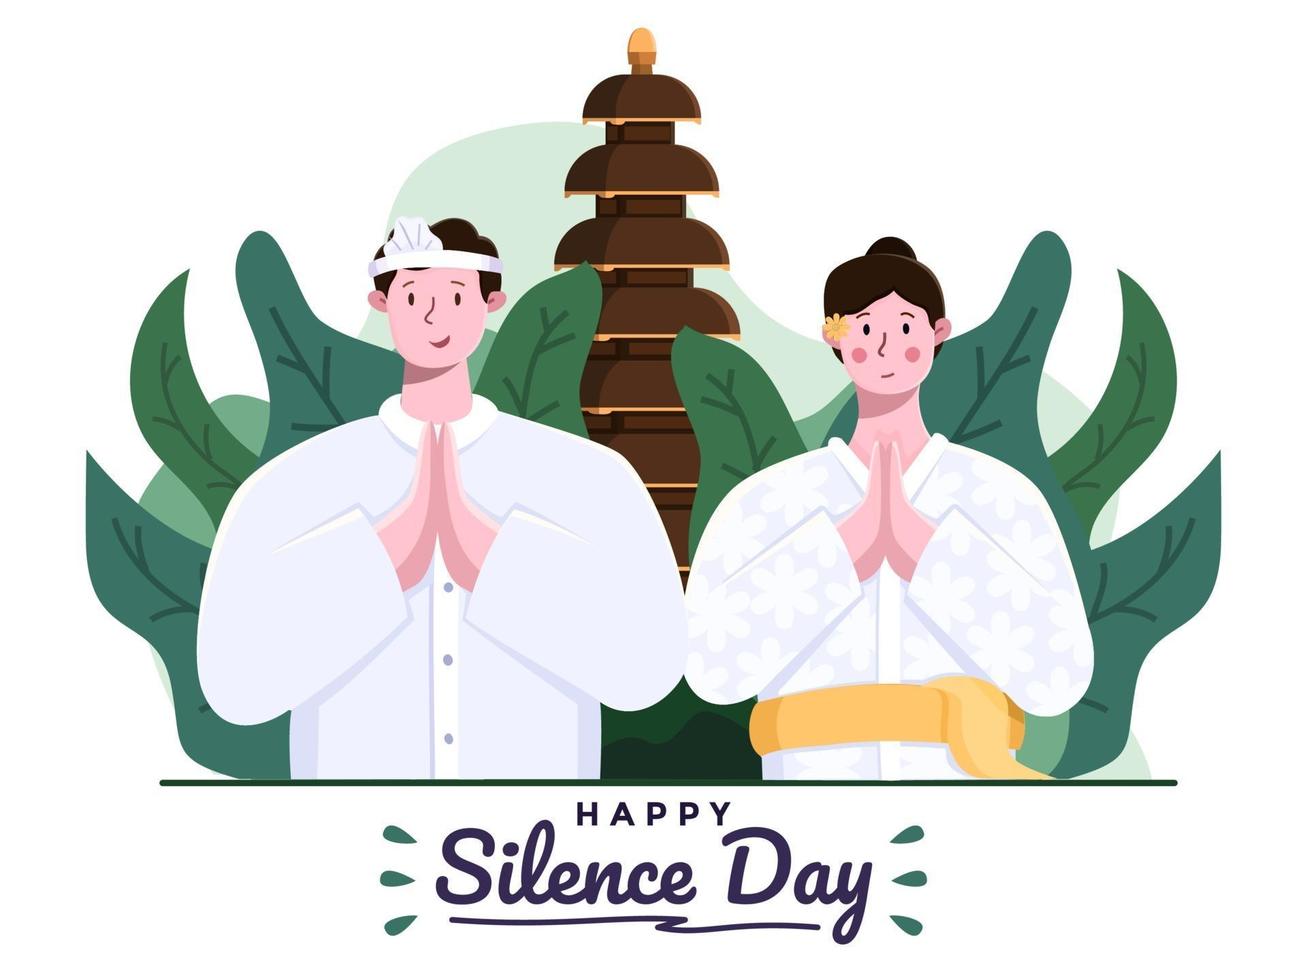 Happy day of silence nyepi and happy saka new years or hindu new year. Bali Couple or people with wear traditional outfit. vector